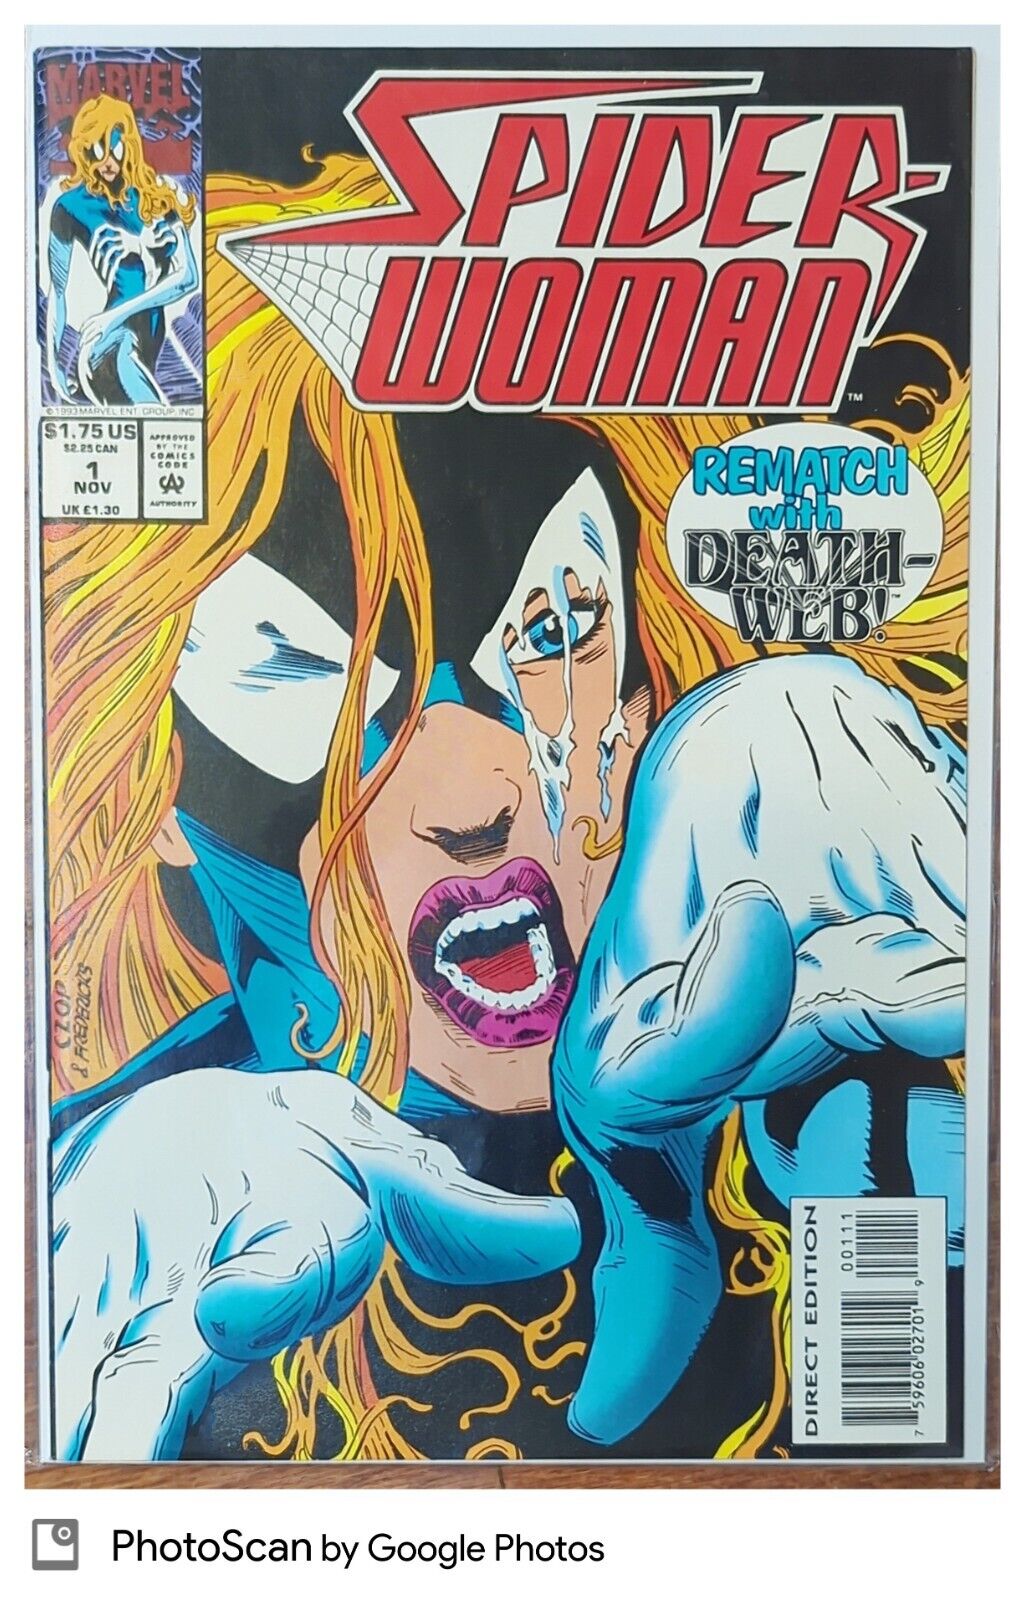 Spider Woman #1 Rematch With Death Web Marvel Comics 1993